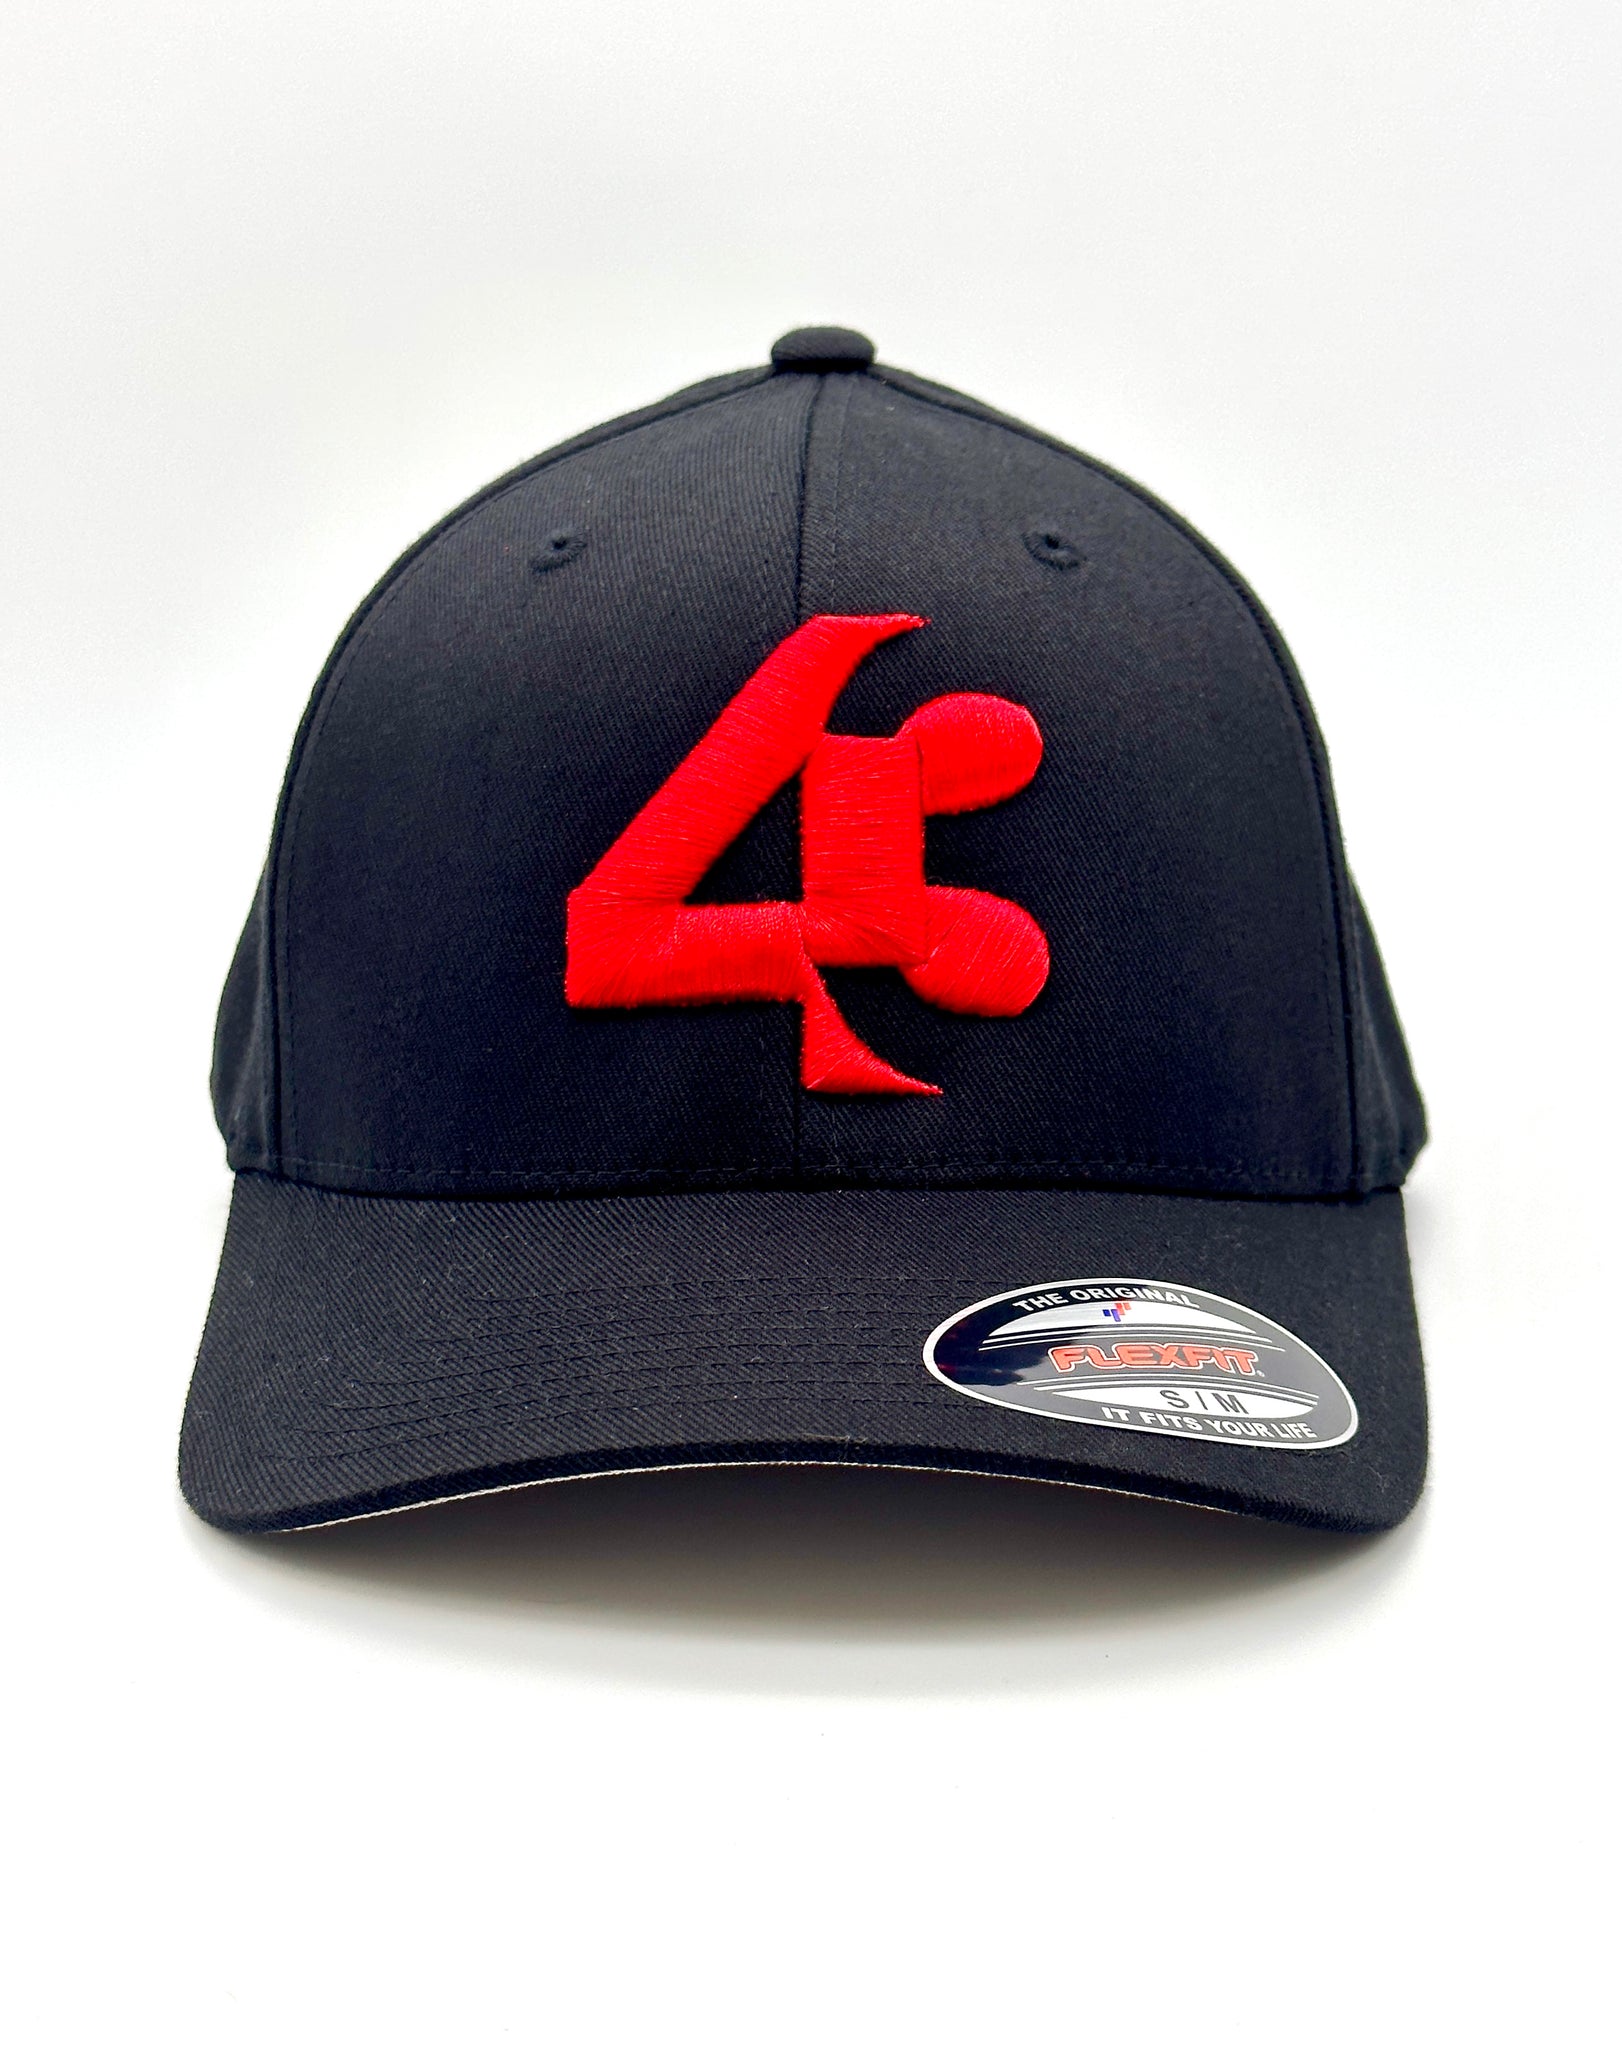 43 Black with red emblem Fitted Flexfit® – FortyThree™ USA